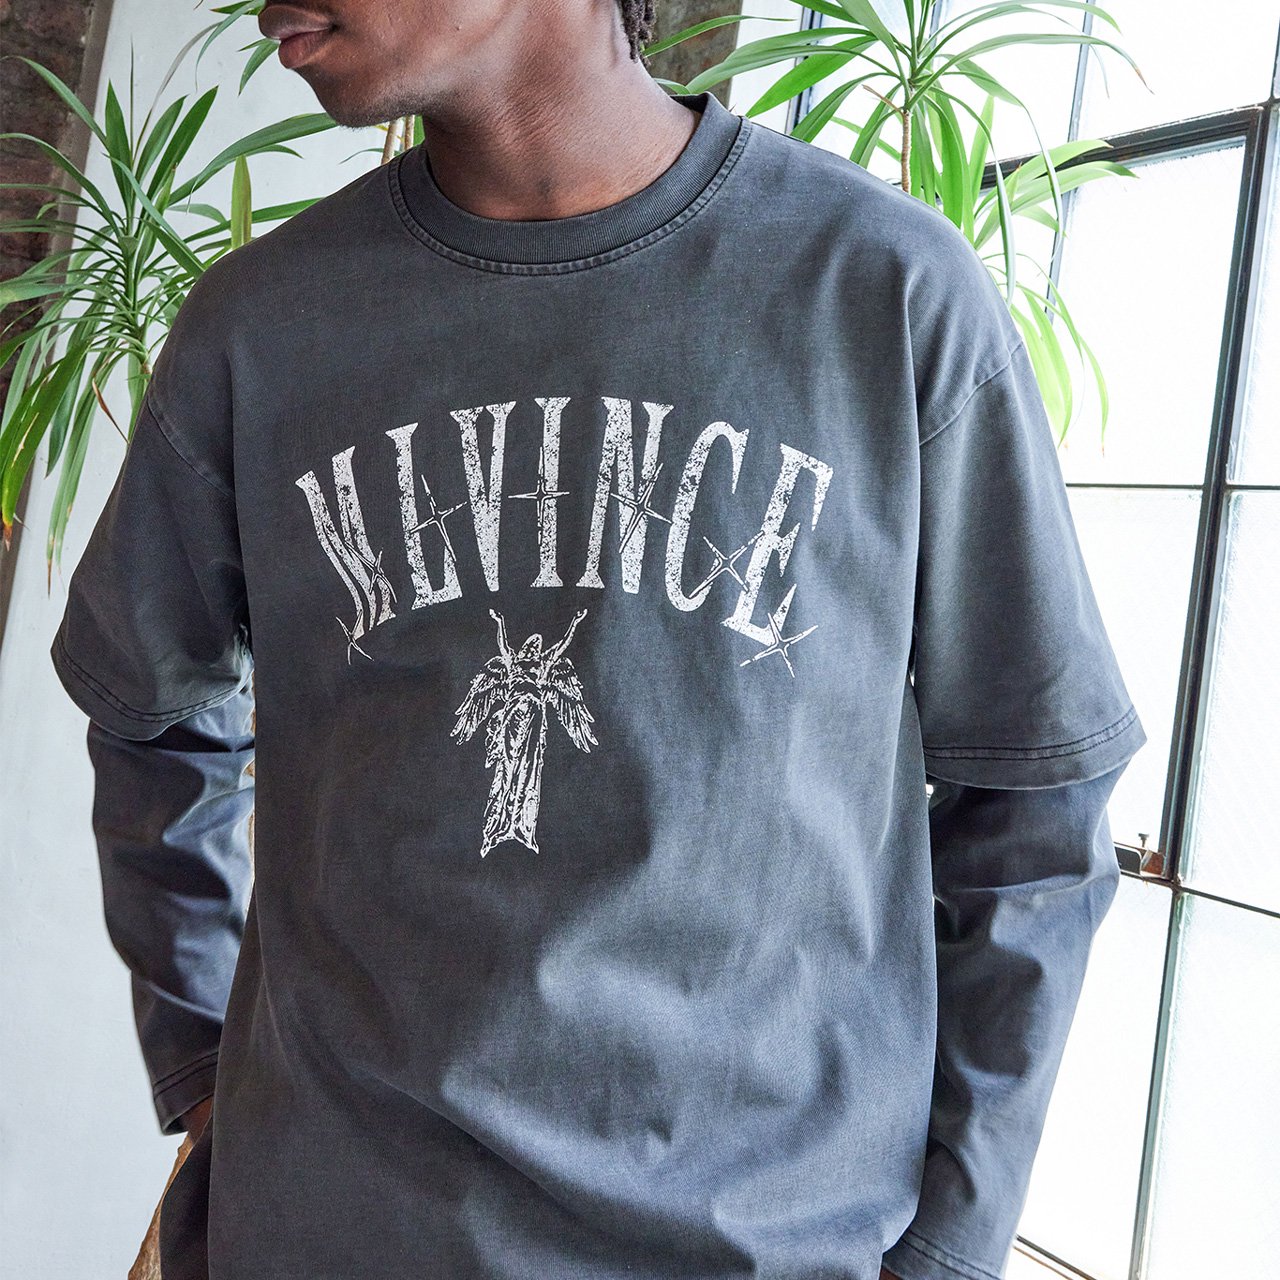 MLVINCE (メルヴィンス) | SEVEN STARS LAYERED L/S TEE WASHED BLACK